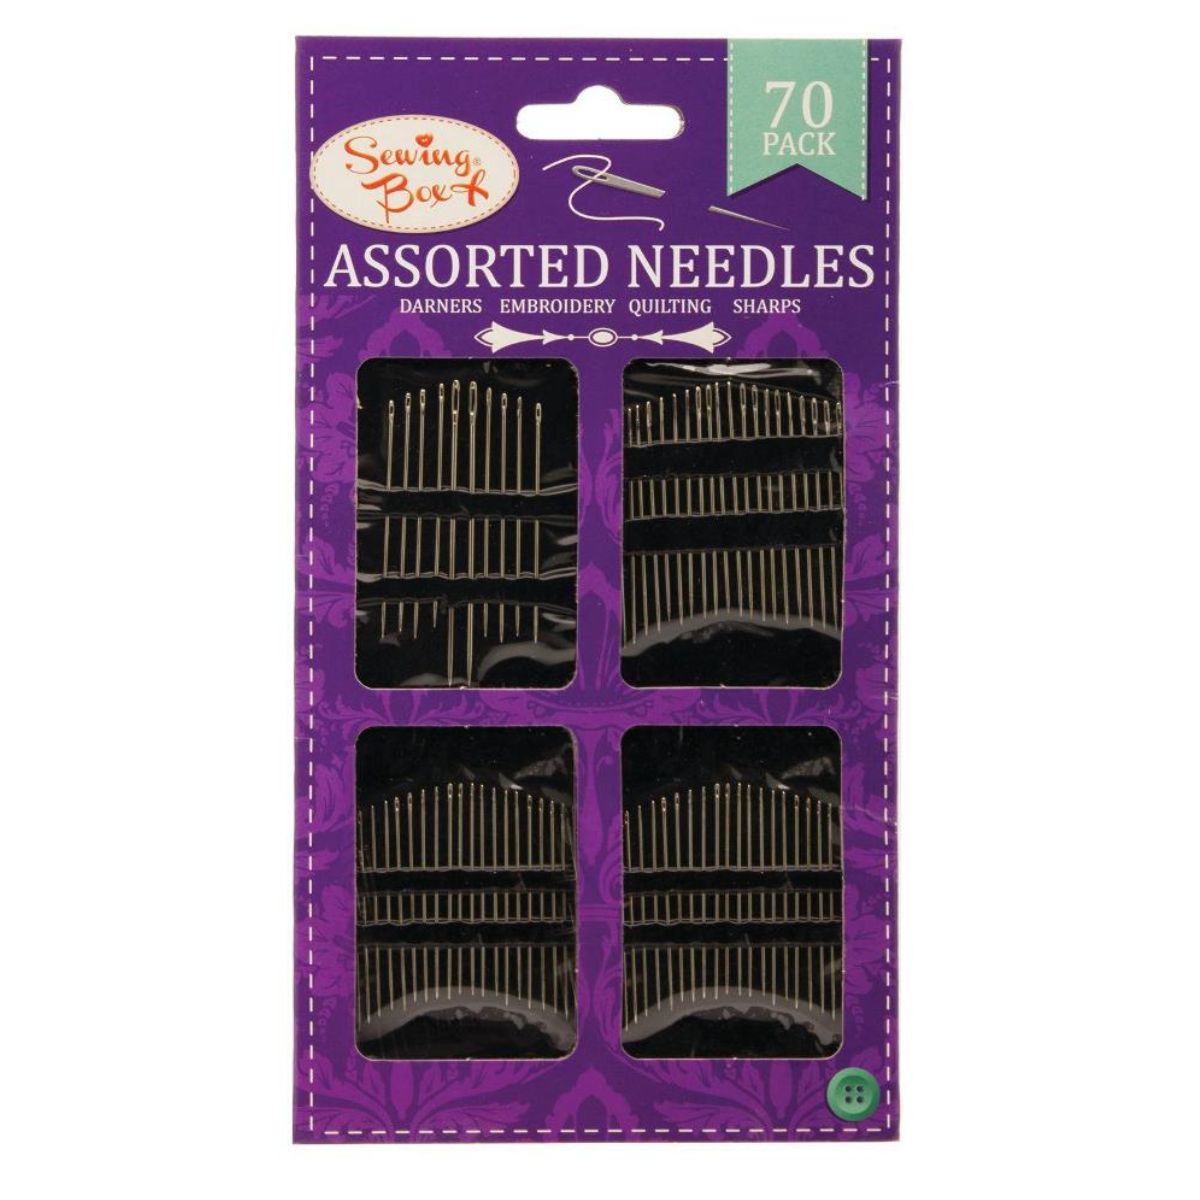 Sentence with product name: A package of Sewing Box - Sewing Needles - 70pcs for darning, embroidery, quilting, and sharp sewing tasks.